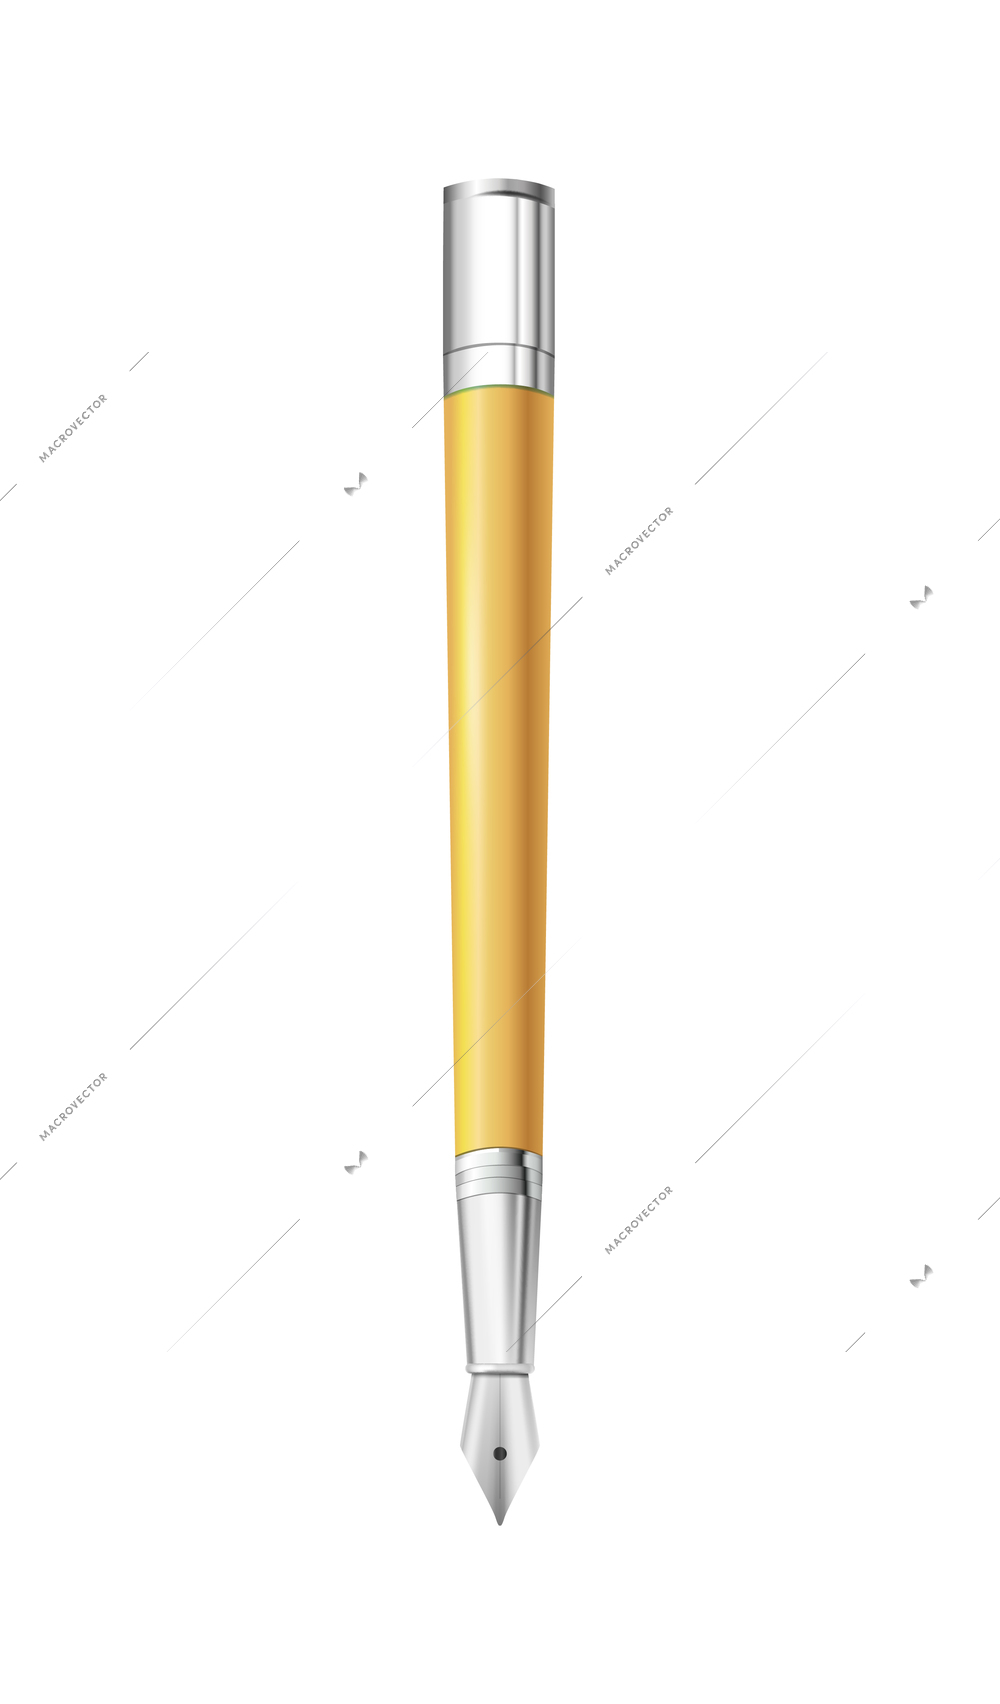 Realistic office items mockup top view composition with isolated image of feather pen vector illustration